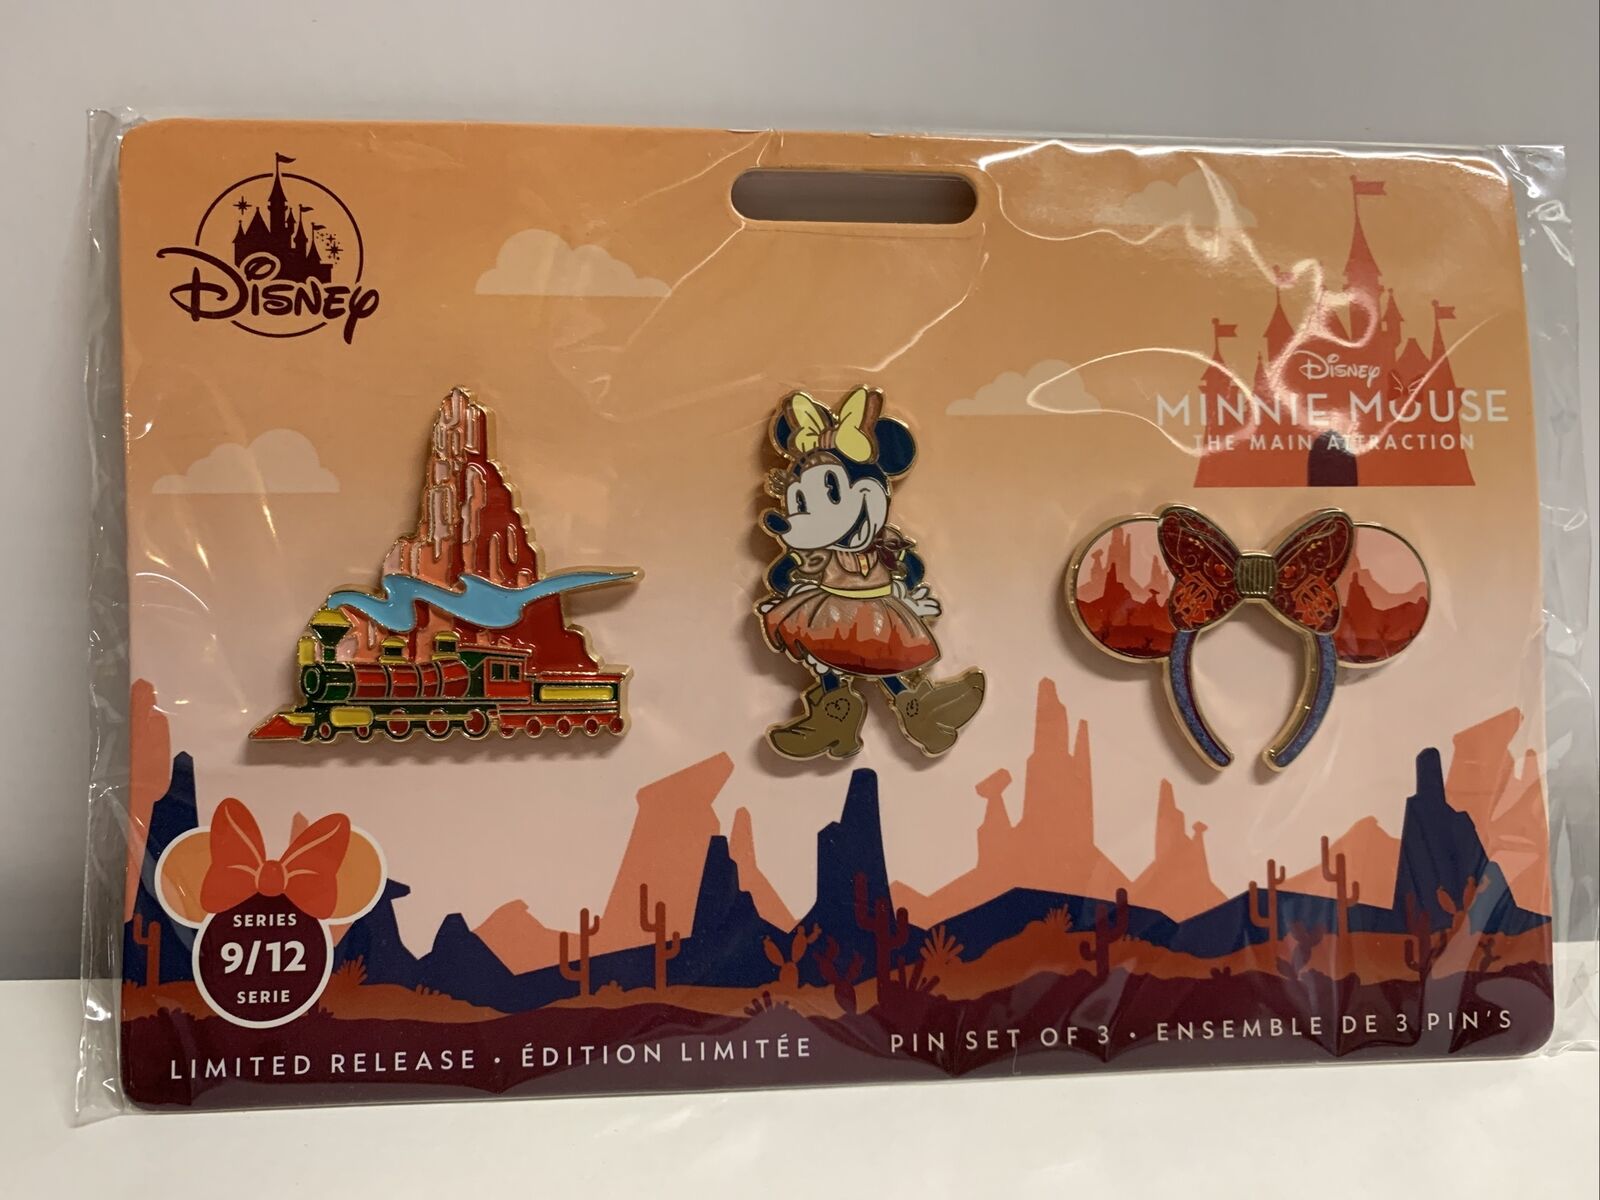 Disney Minnie Mouse The Main Attraction Thunder Mountain Pin Set September 9/12